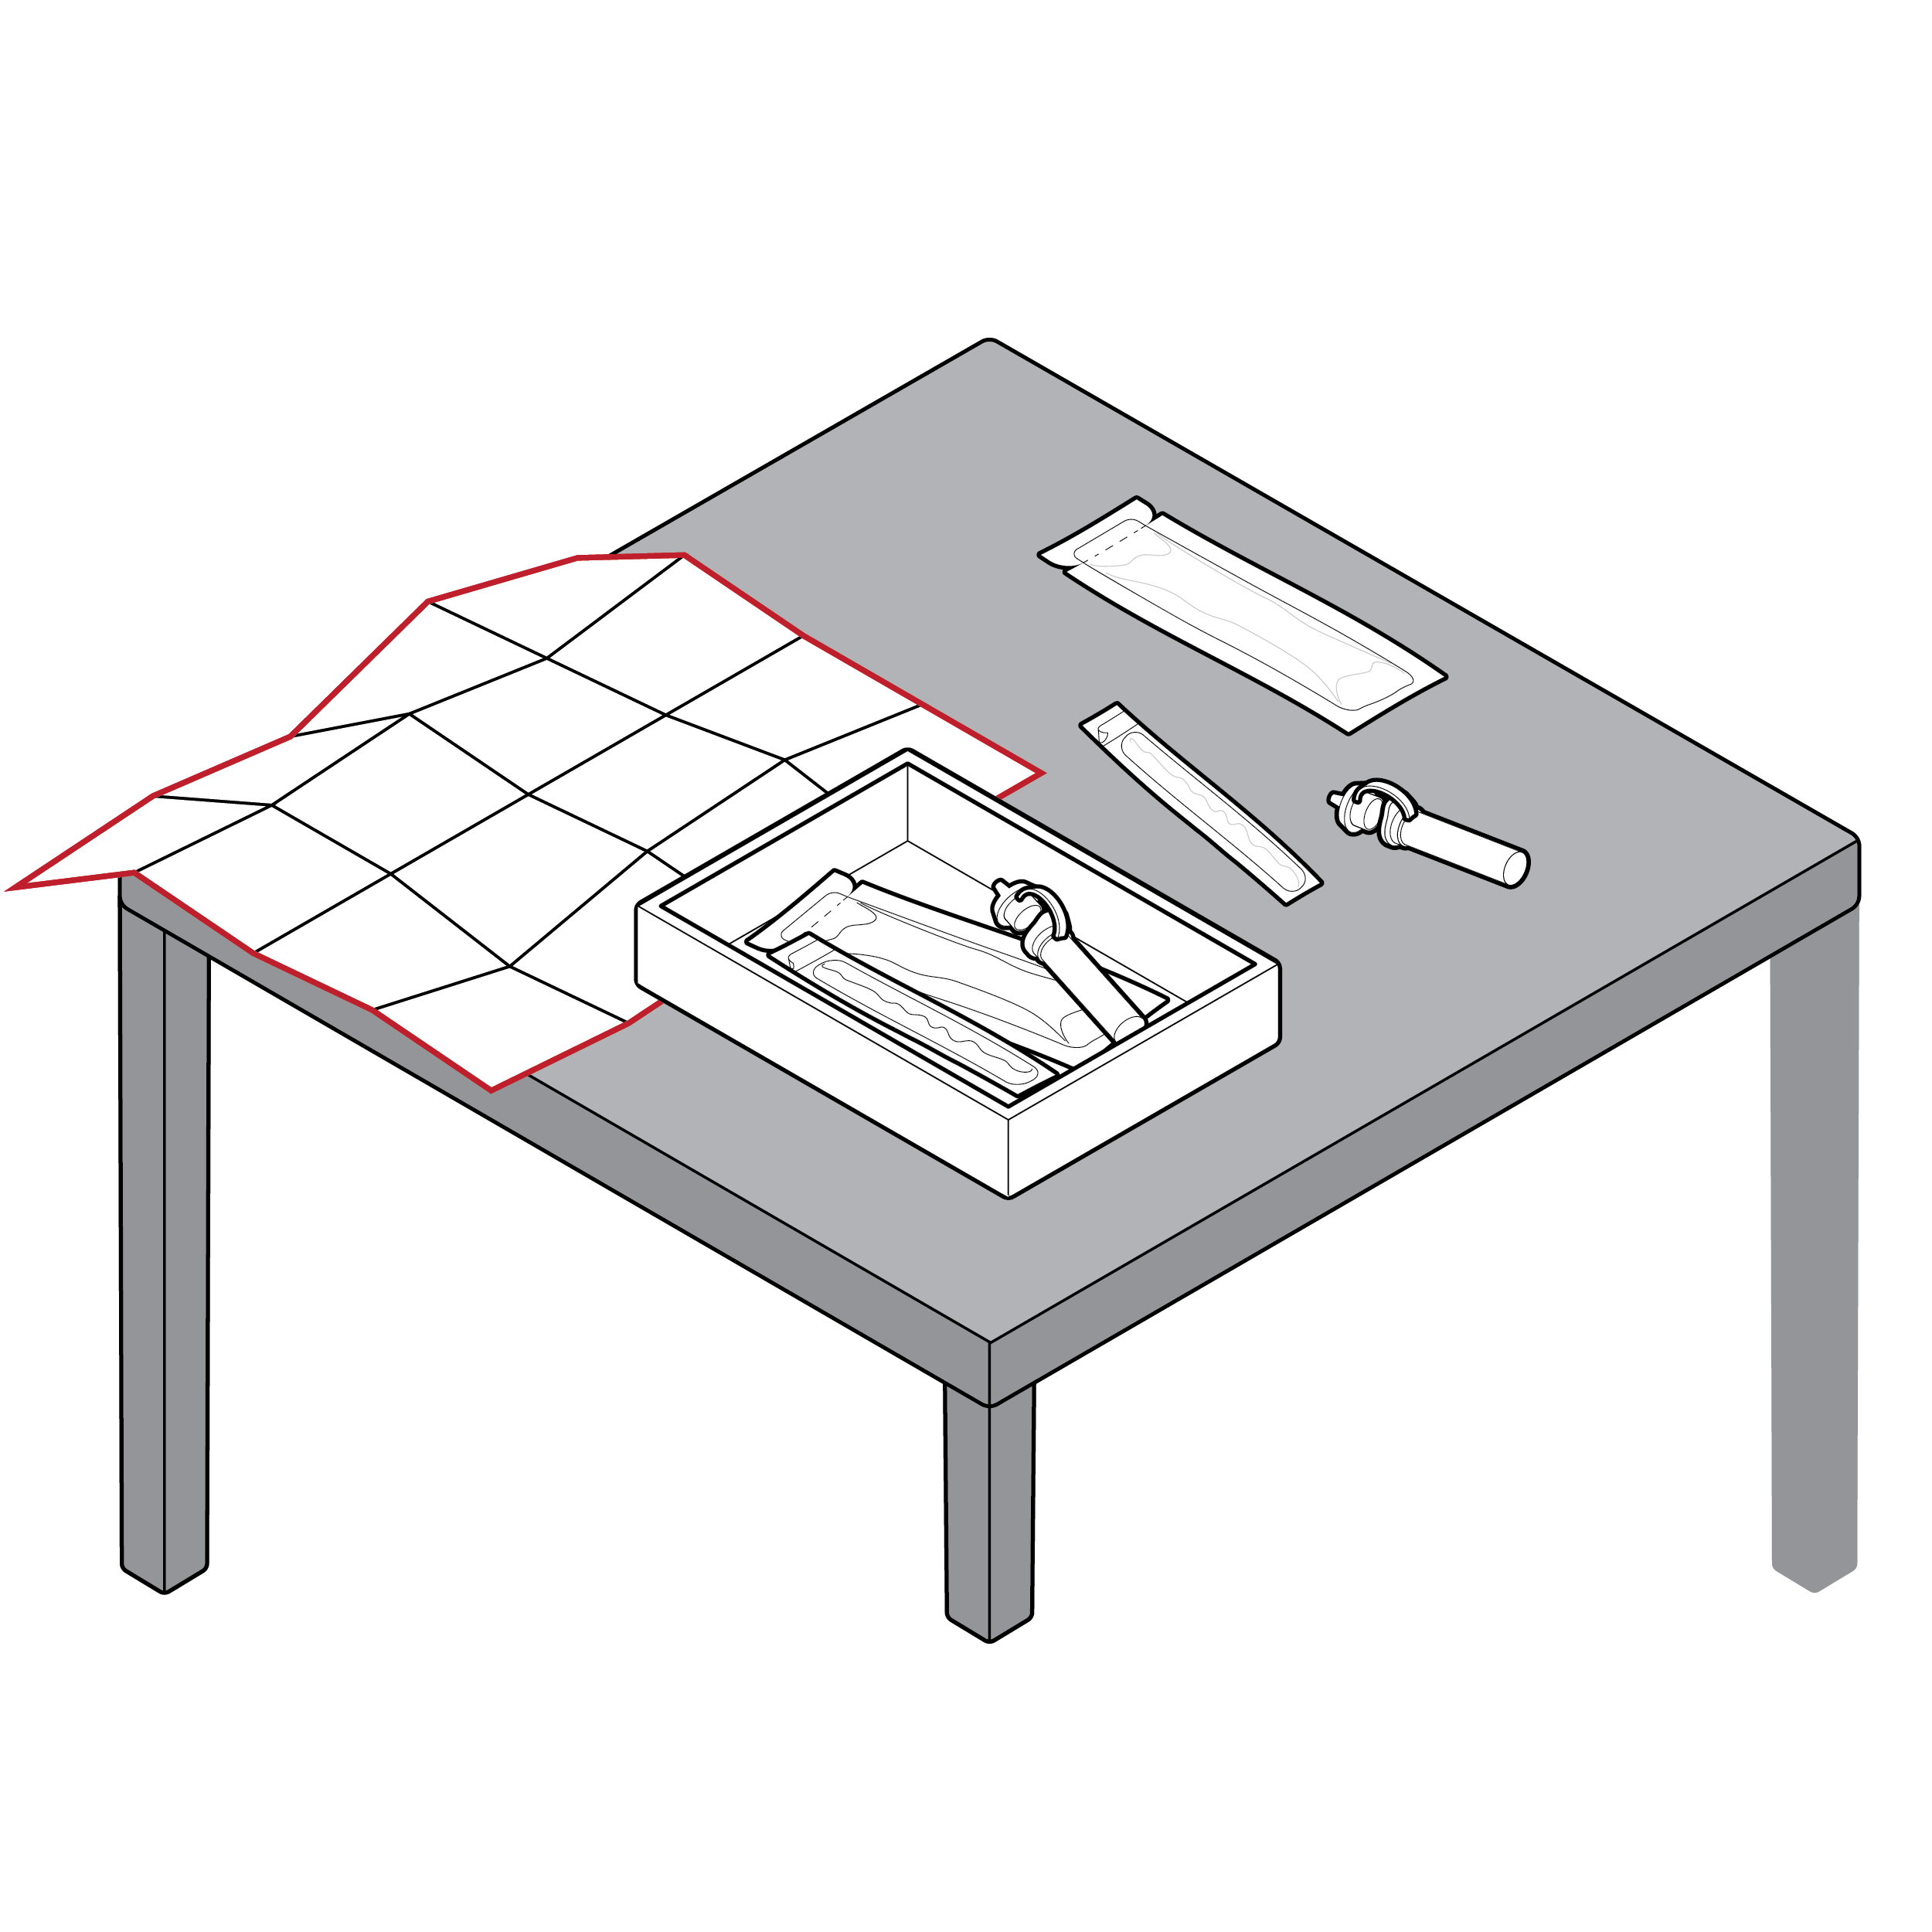 MA test kit and fully unfolded set of instructions lie on a tabletop. The instructions extend off the edge of the table.